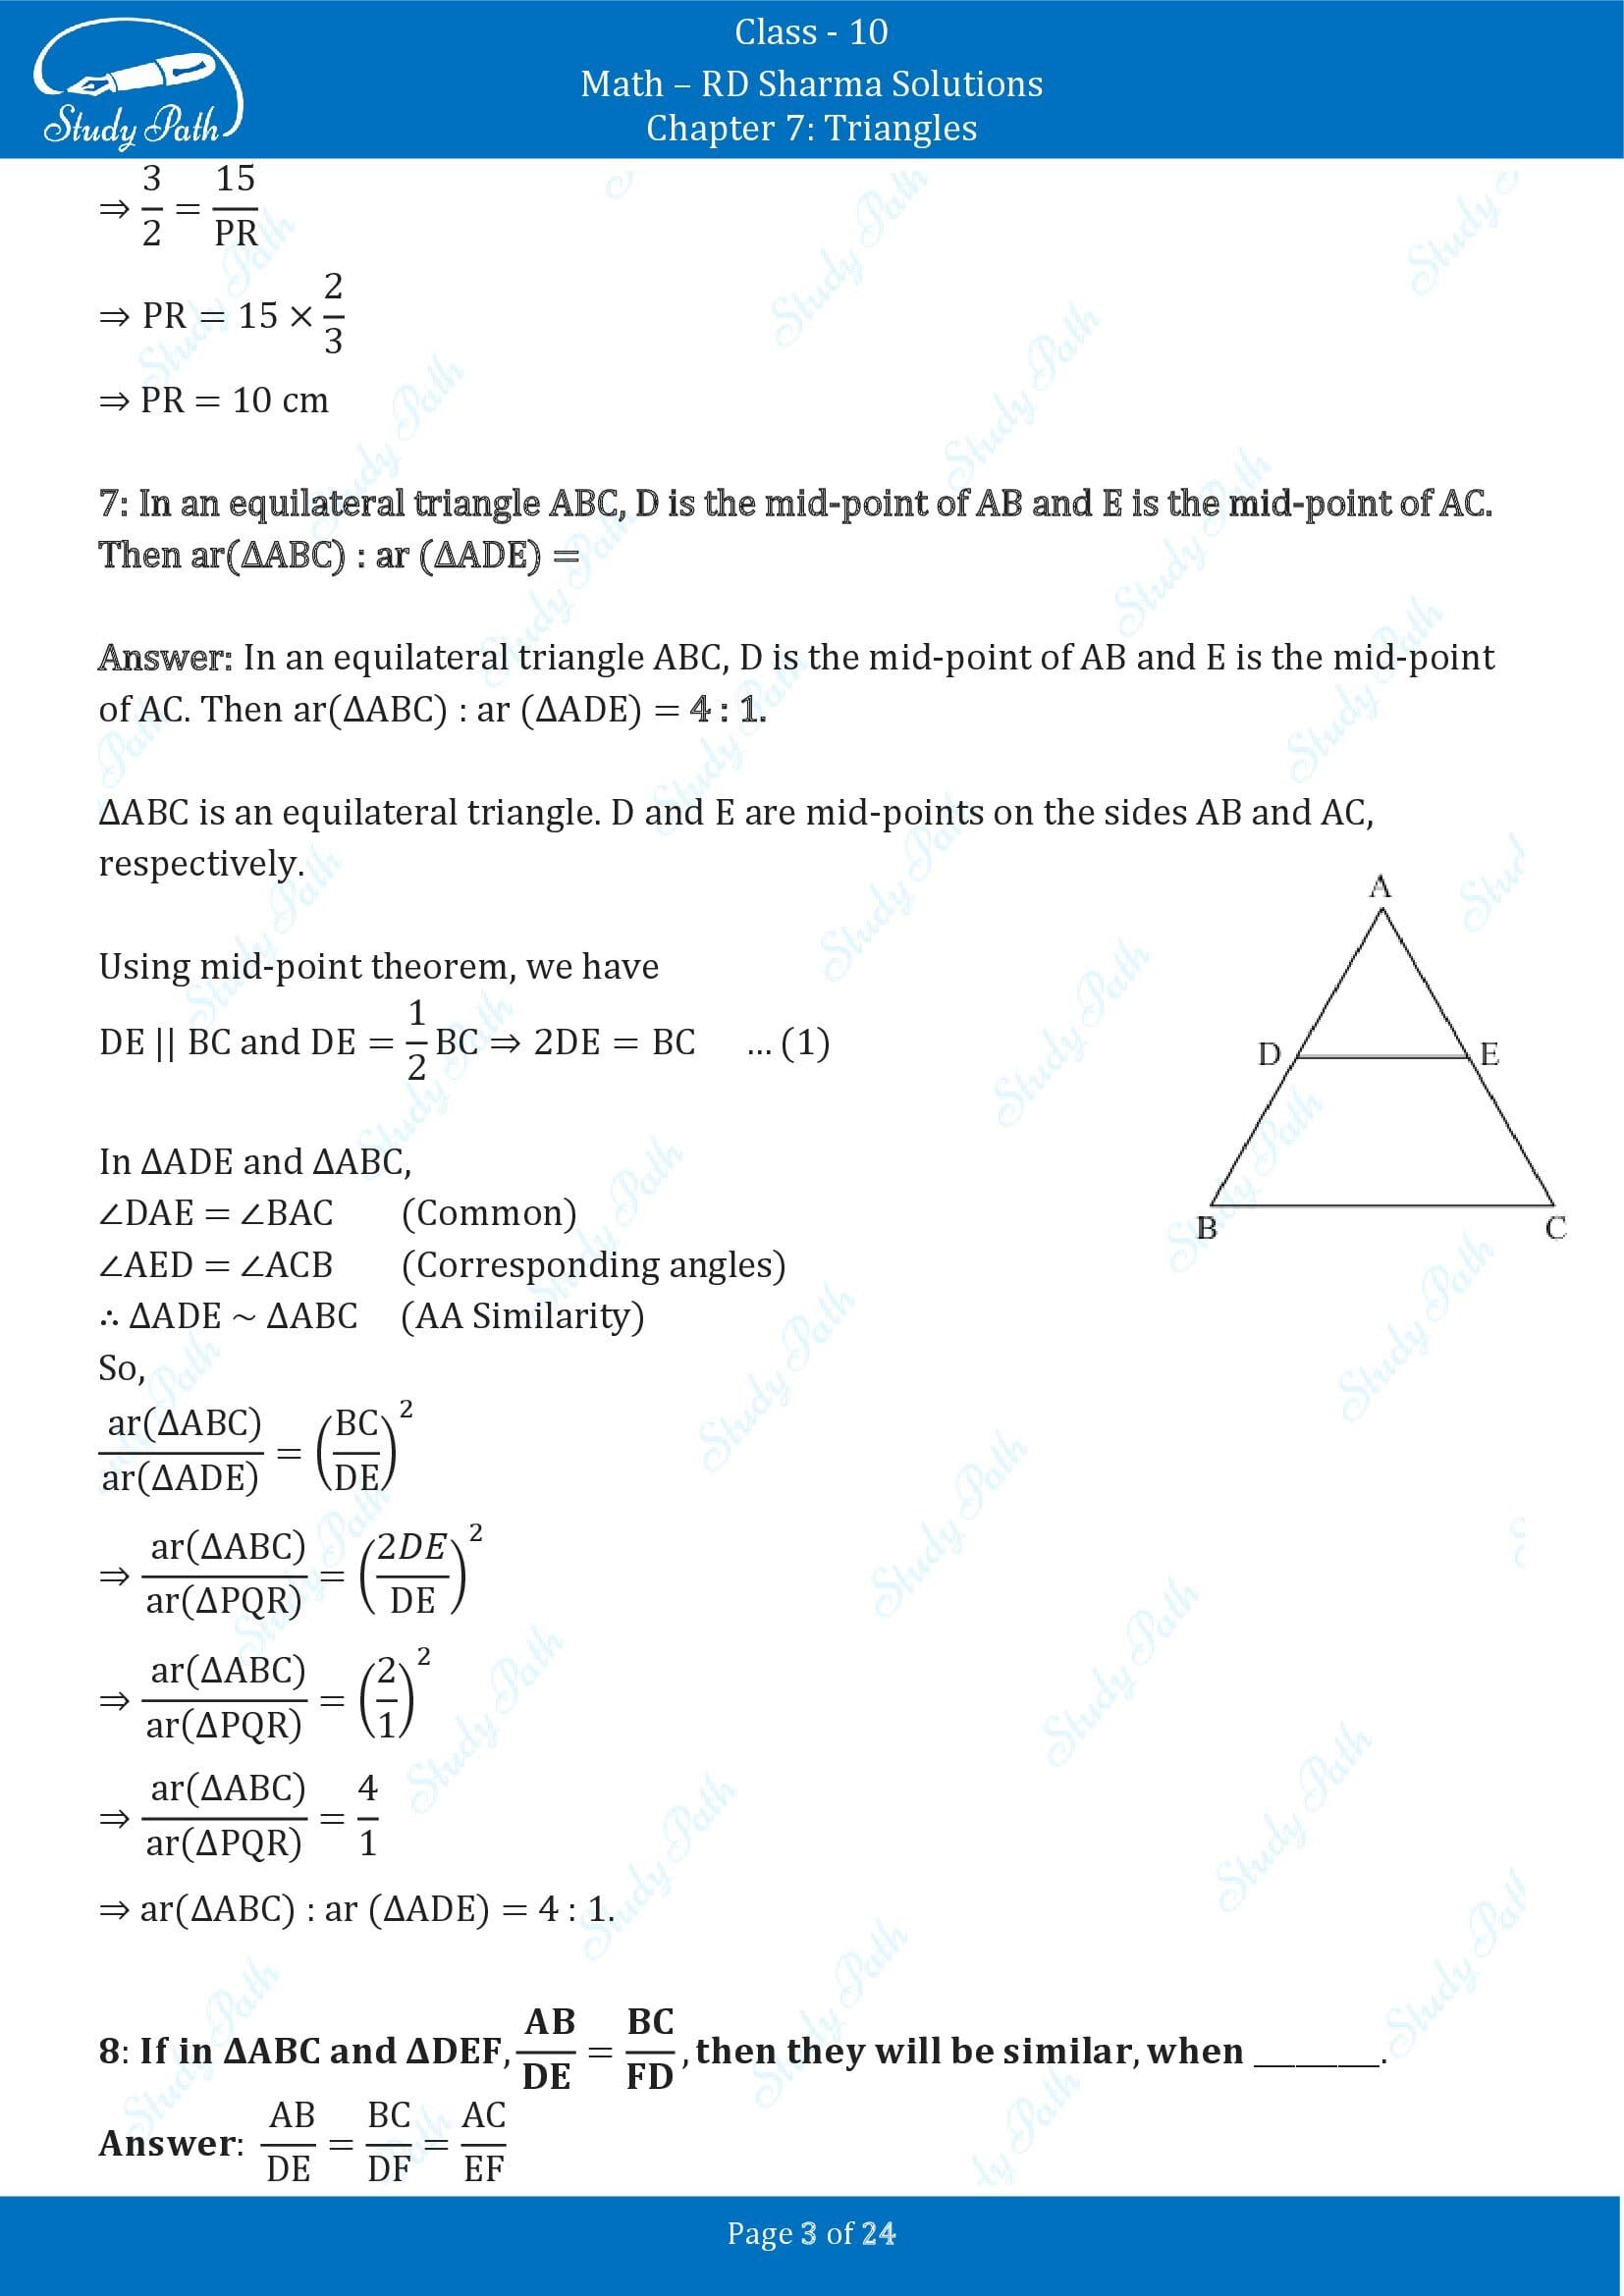 RD Sharma Solutions Class 10 Chapter 7 Triangles Fill in the Blank Type Questions FBQs 00003